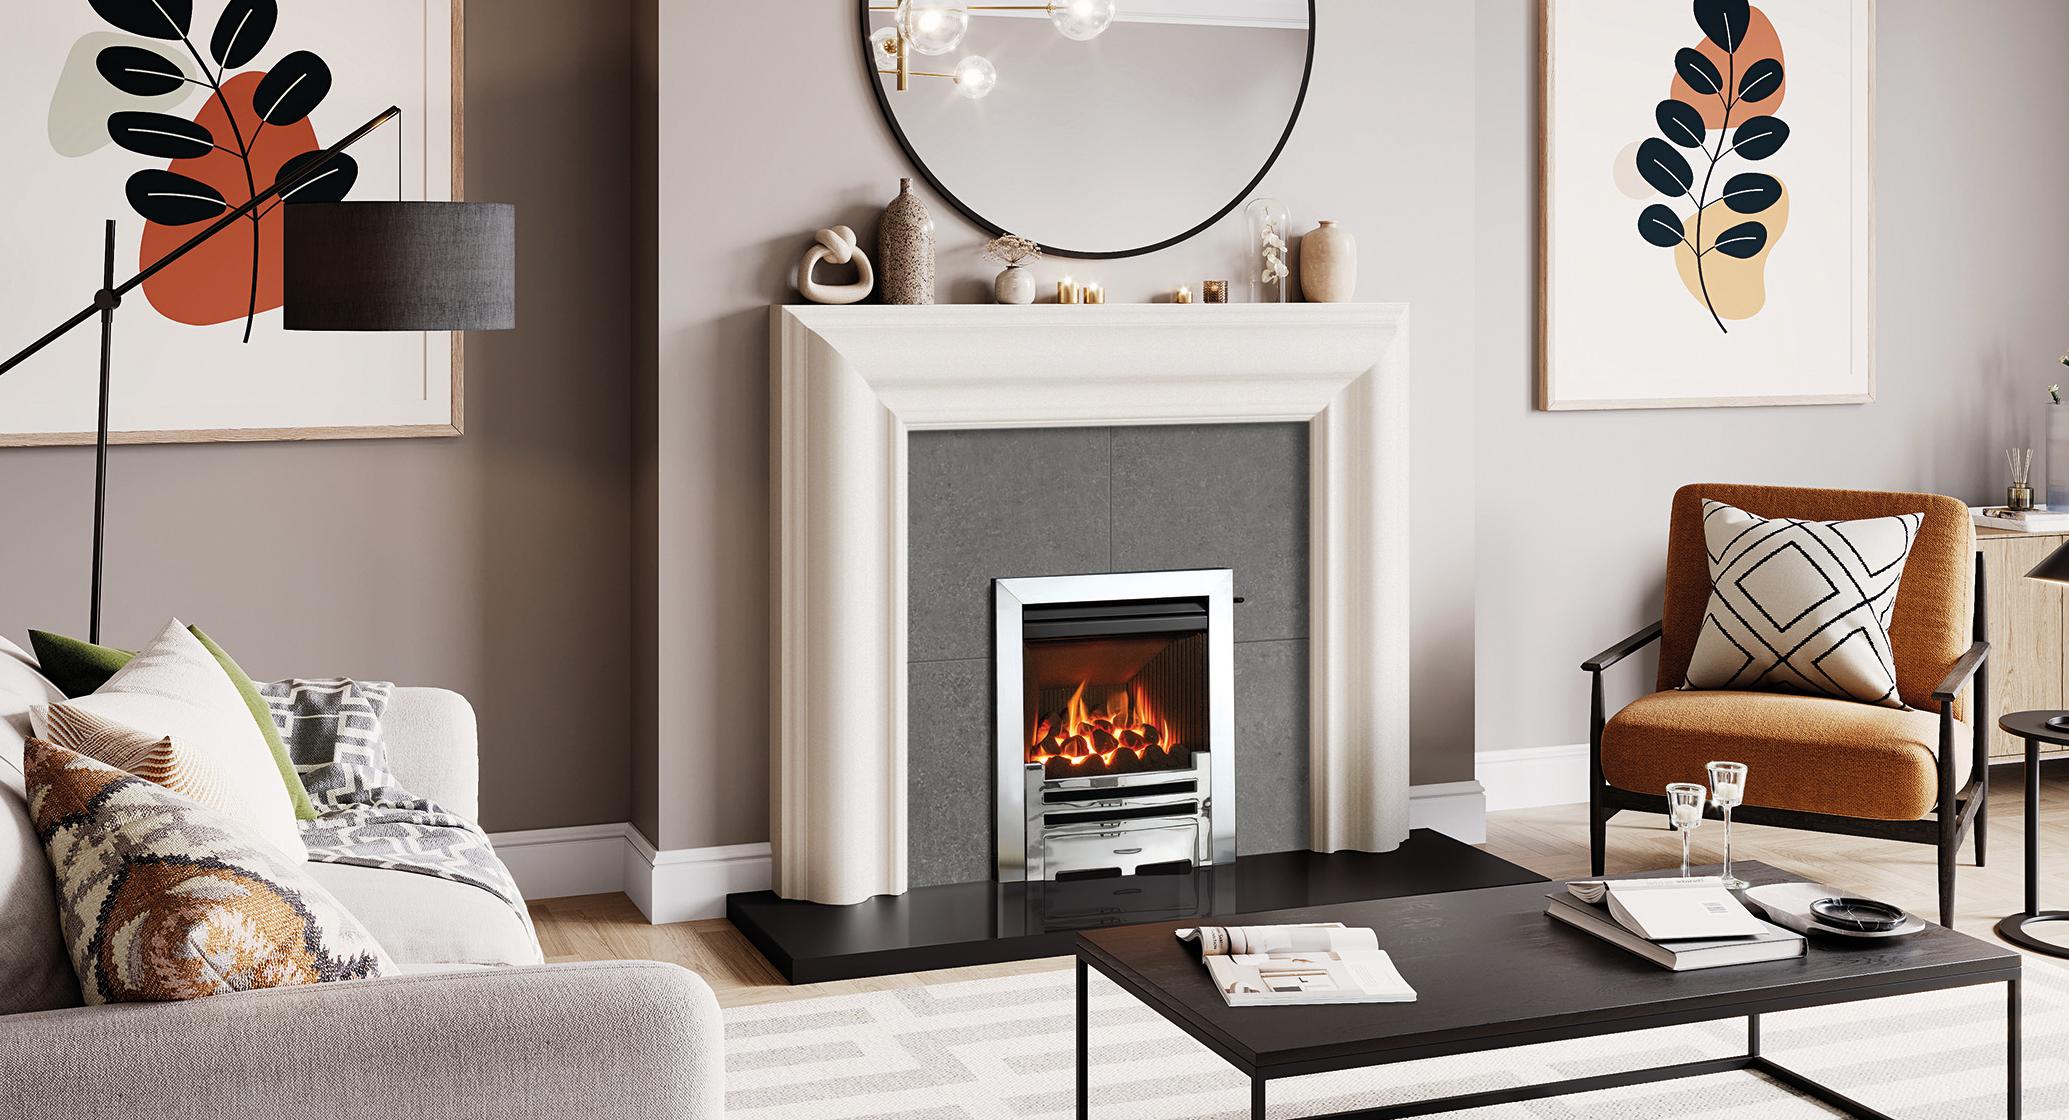 Gazco Logic HE gas fire with Polished Chome Arts front and Polished Stainless Steel Box Profil2 frame. Installed within a Grafton Limestone mantel. Hearth Mounted Gas Fires